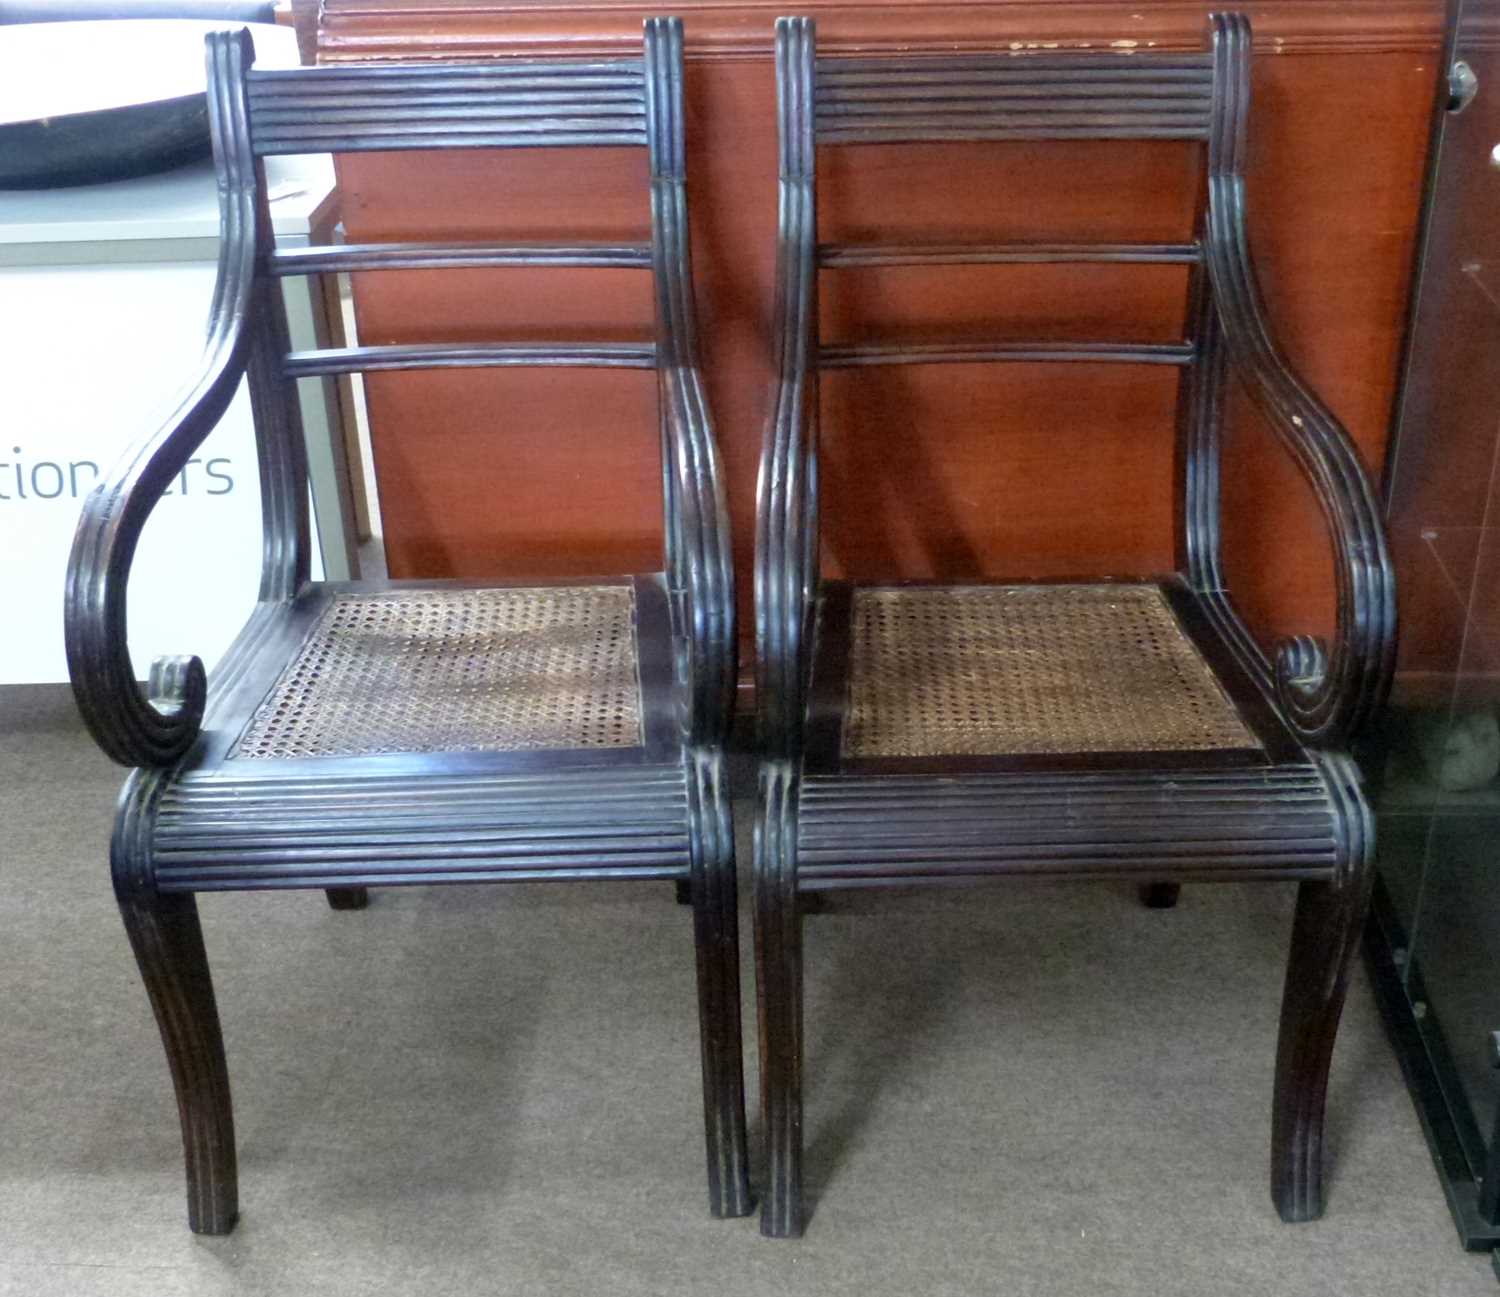 Pair of Georgian mahogany scroll arm chairs with cane seats and sabre type front legs decorated